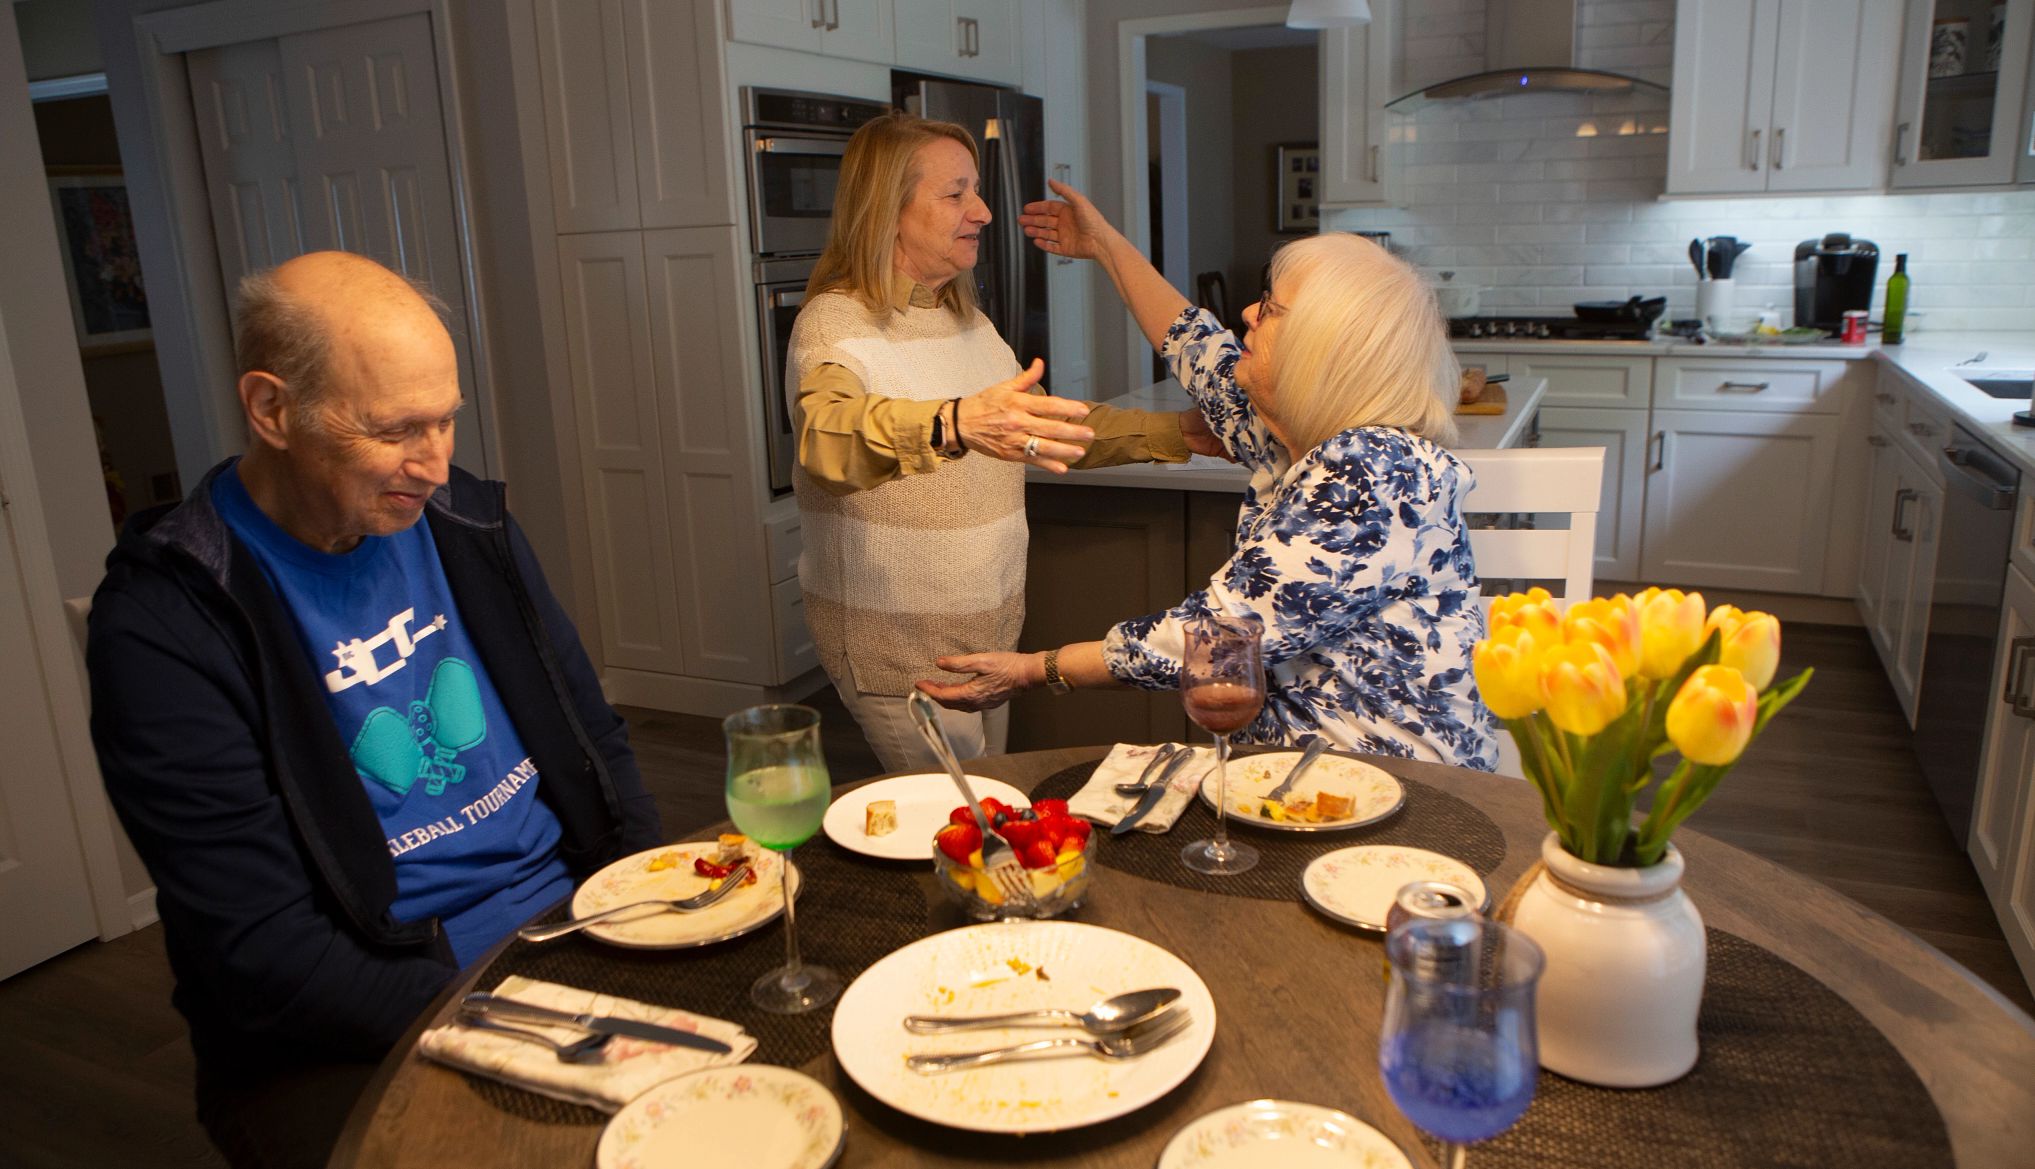 judy rosenstein reaches out to hug her friend, wendy stein. judy and her husband, abe, are seated at a kitchen table with plates of food in front of them.